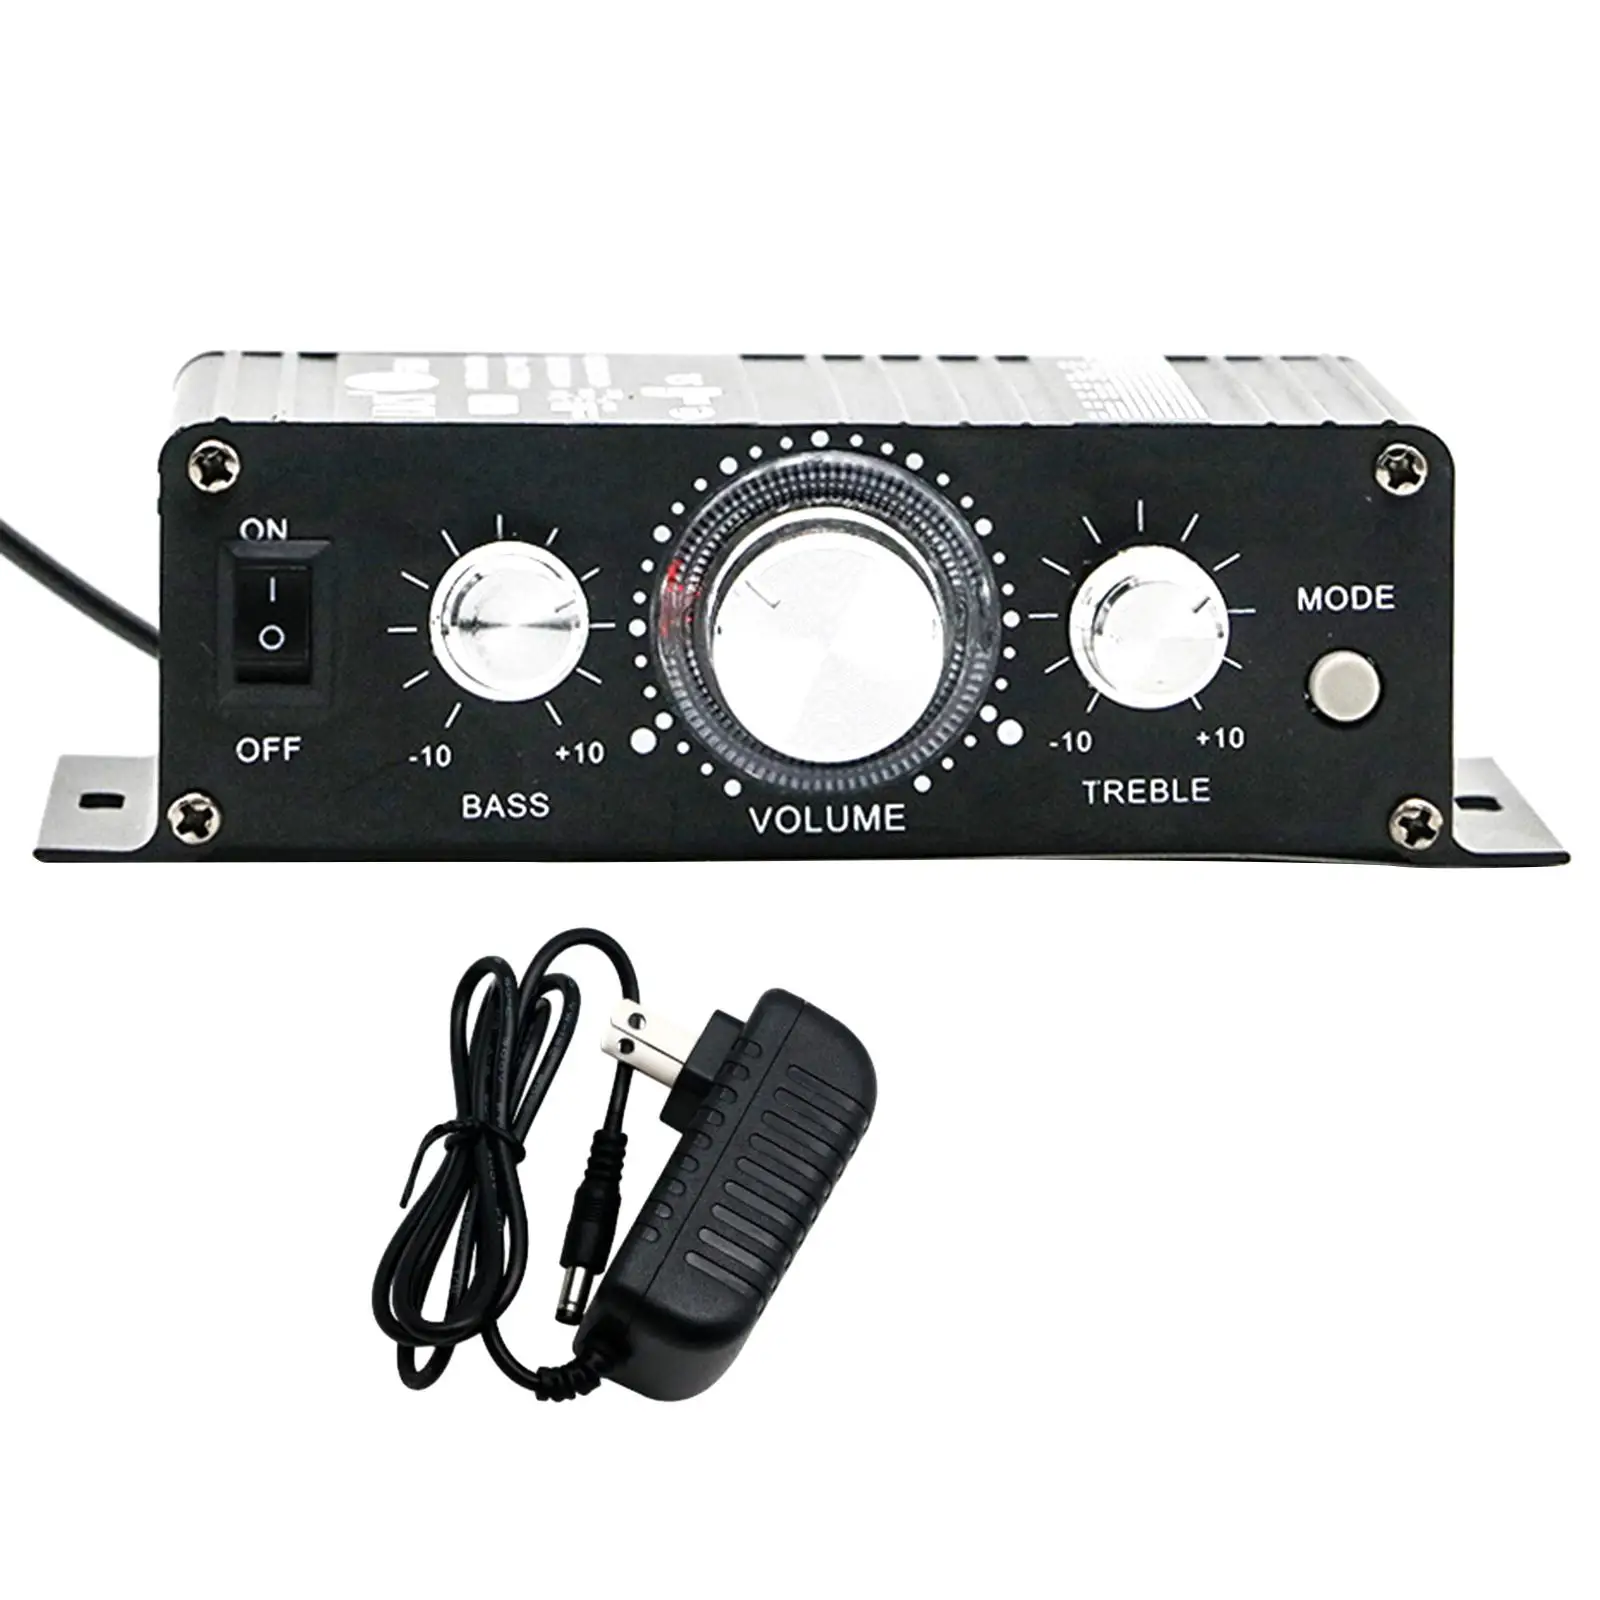 Bluetooth Power Amplifier Portable 2 Channel Small Immersive Effect Audio Amplifier HiFi Stereo for Car Party Bar Home Theater